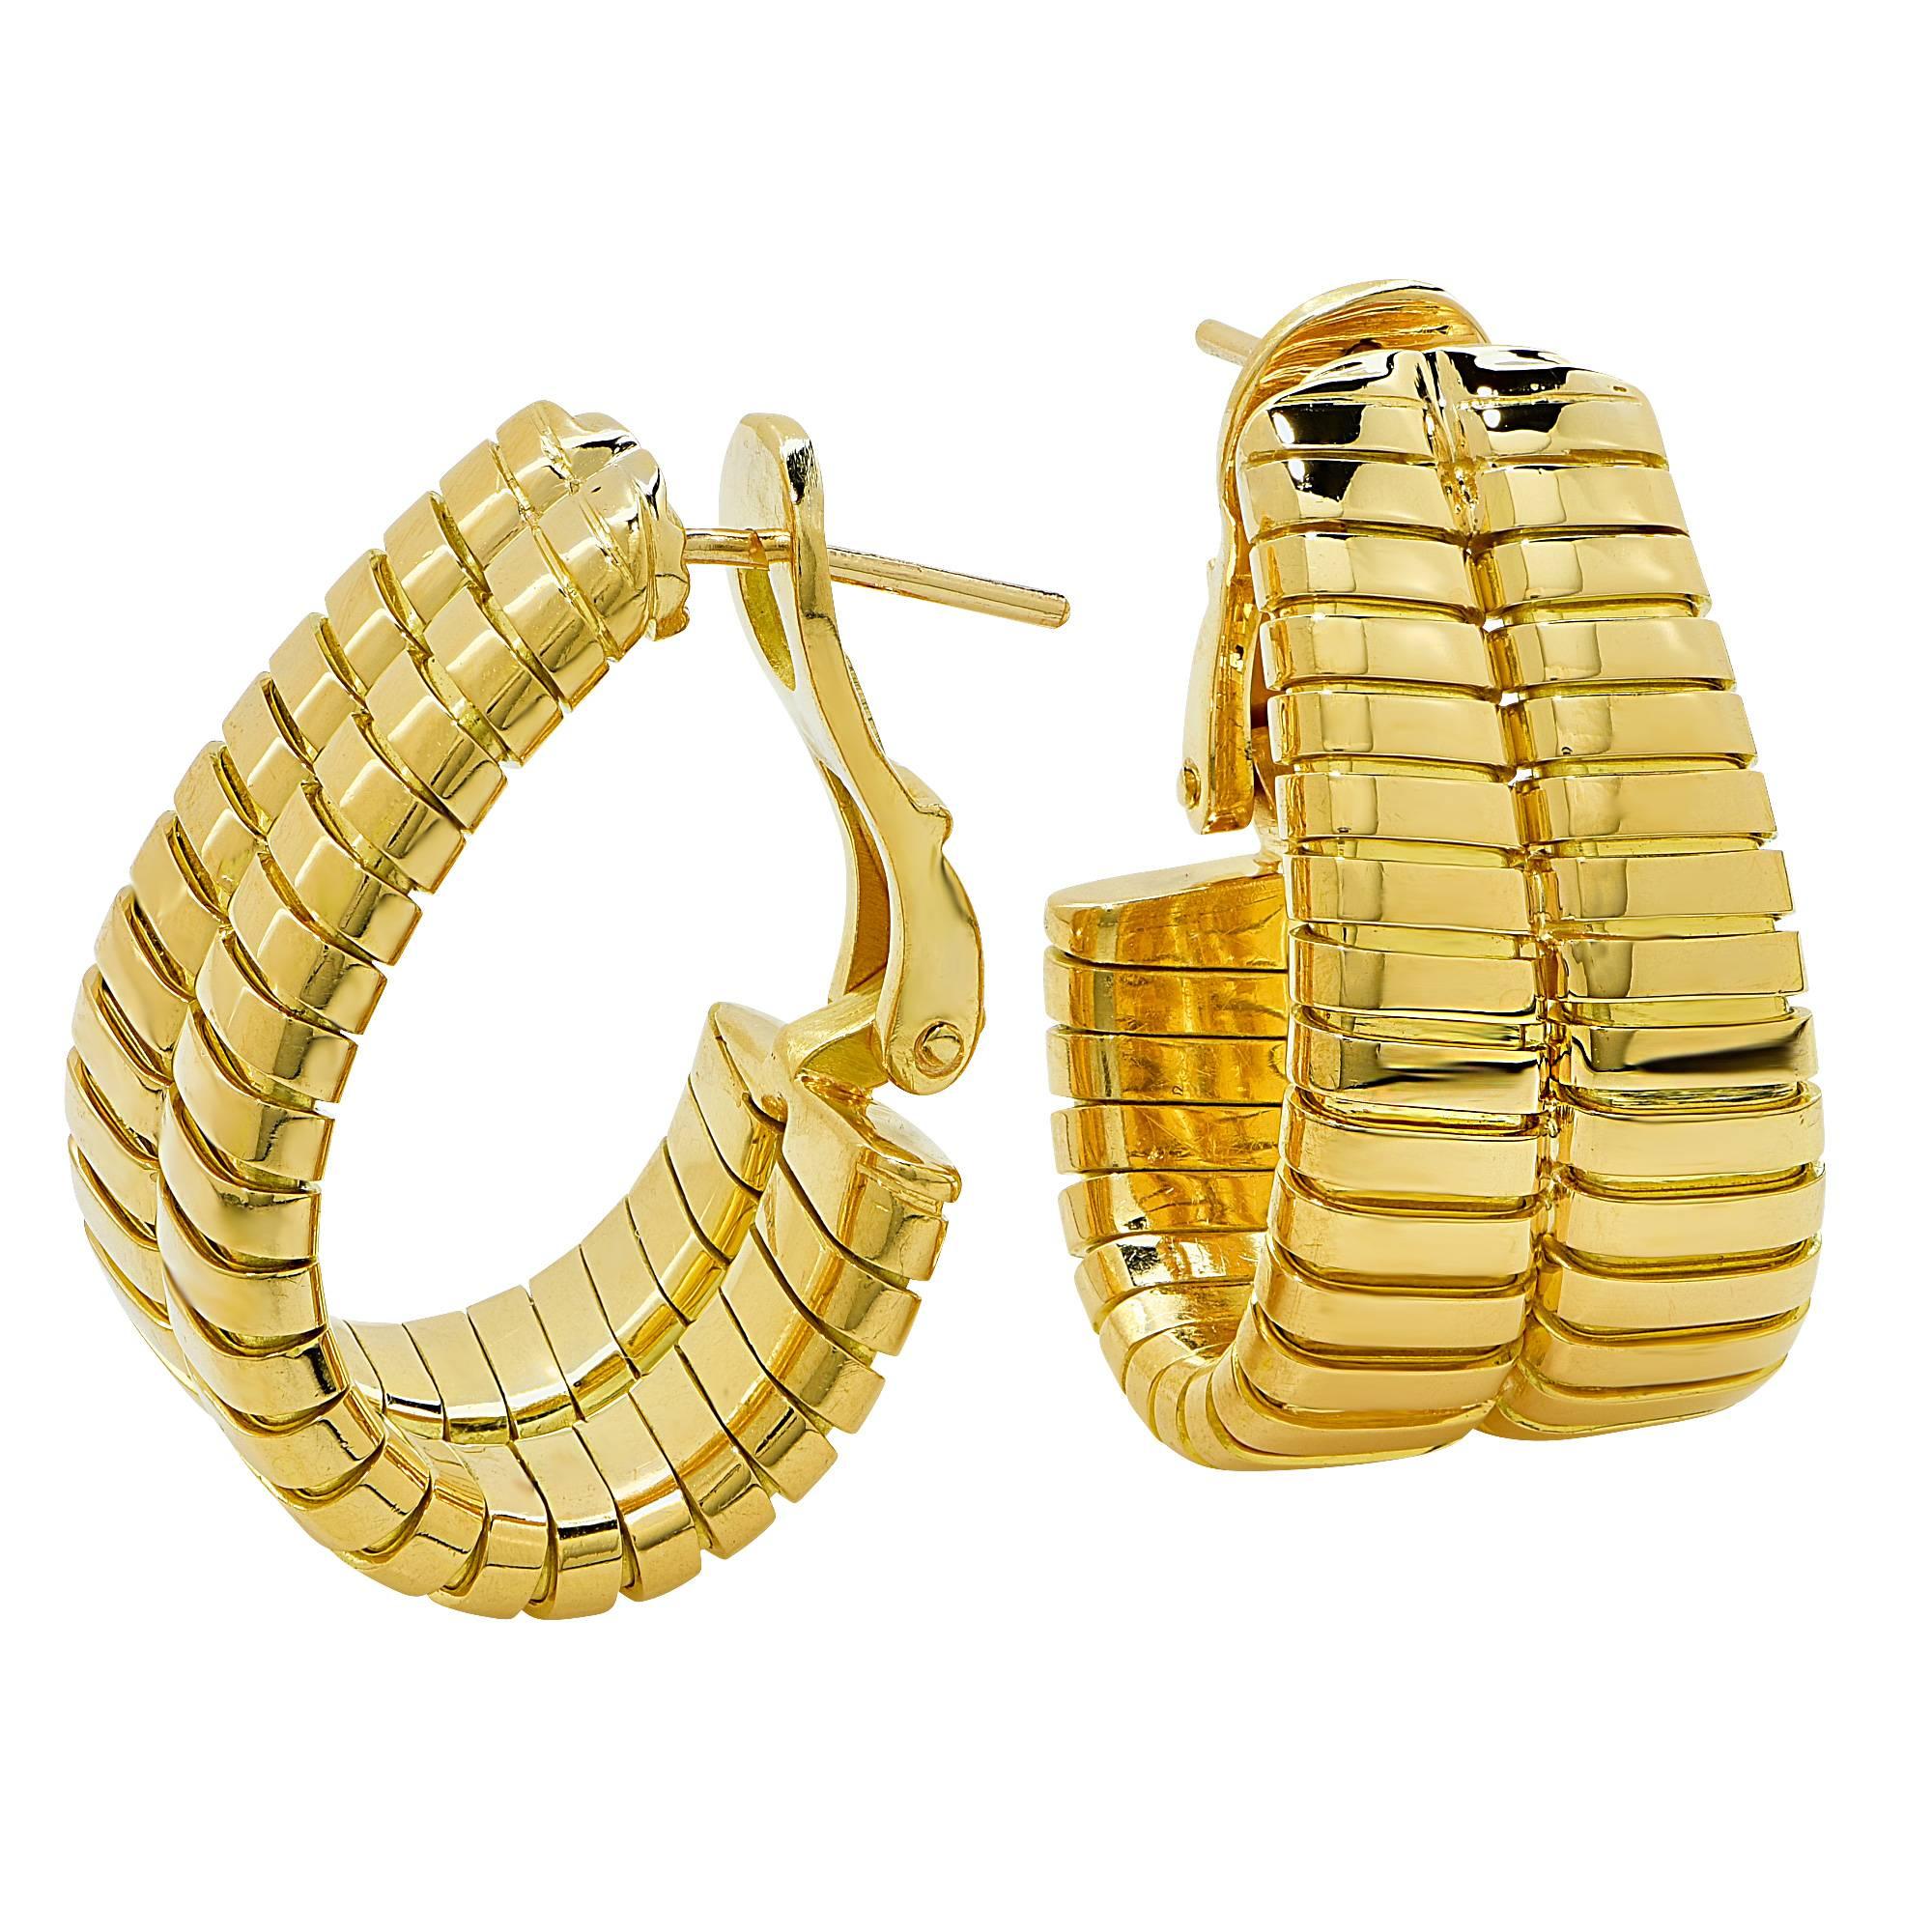 18k yellow gold Buglari hoop earrings.

Metal weight: 36.21 grams

These Bulgari earrings are accompanied by a retail appraisal performed by a GIA Graduate Gemologist.